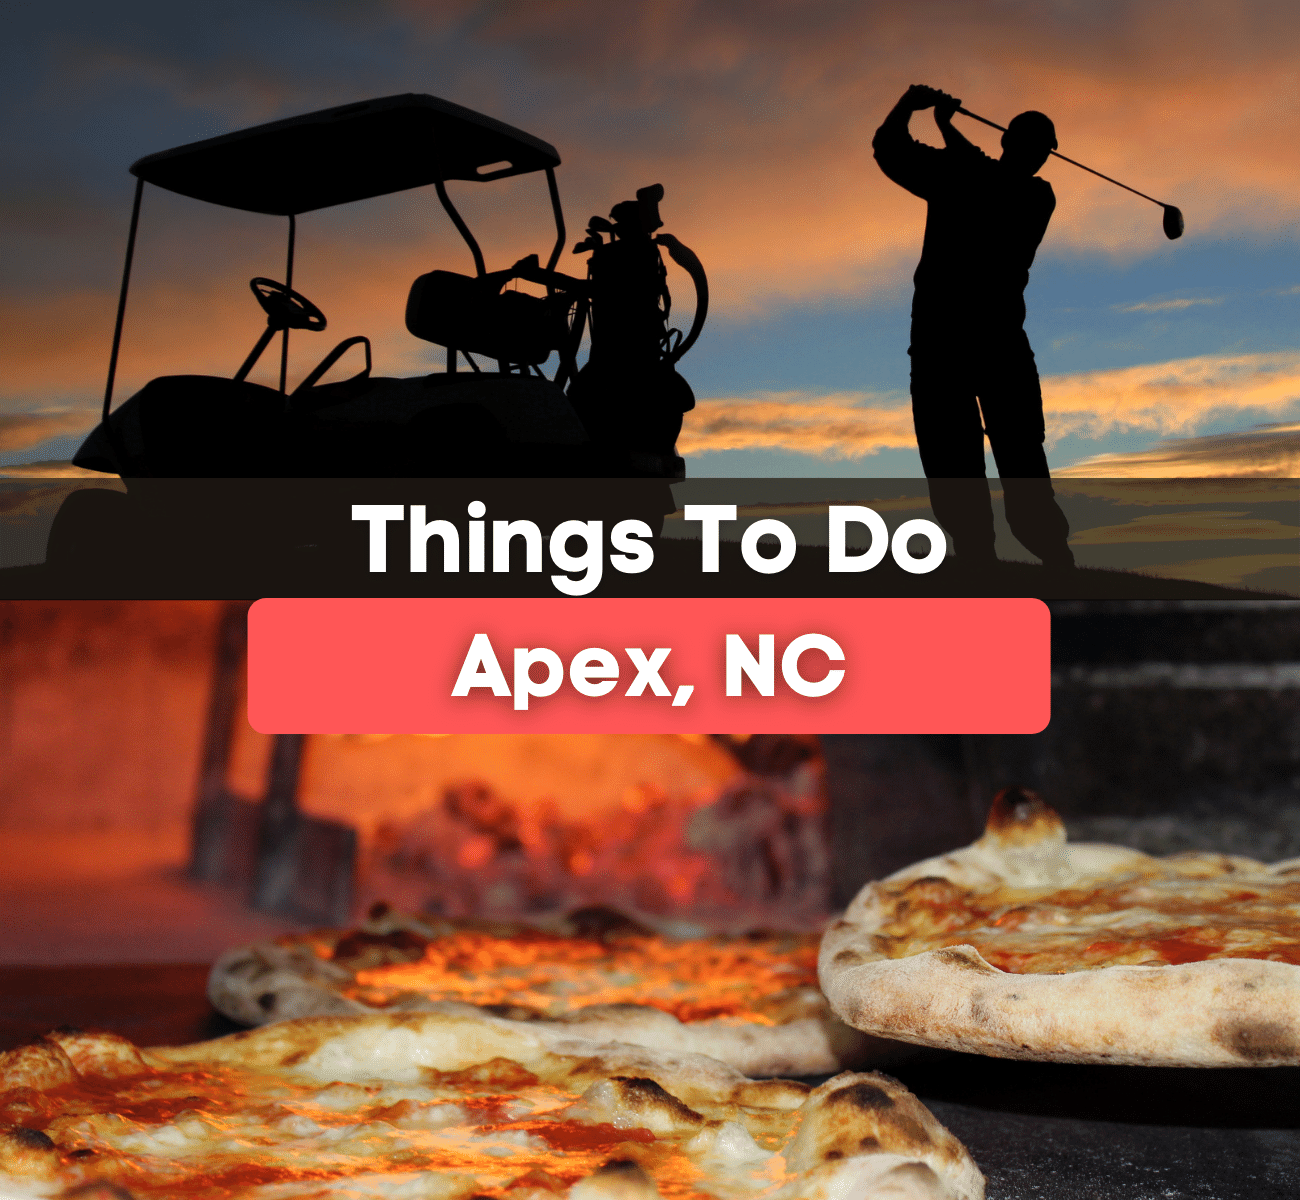 Golf at sunset and pizza in a pizza oven